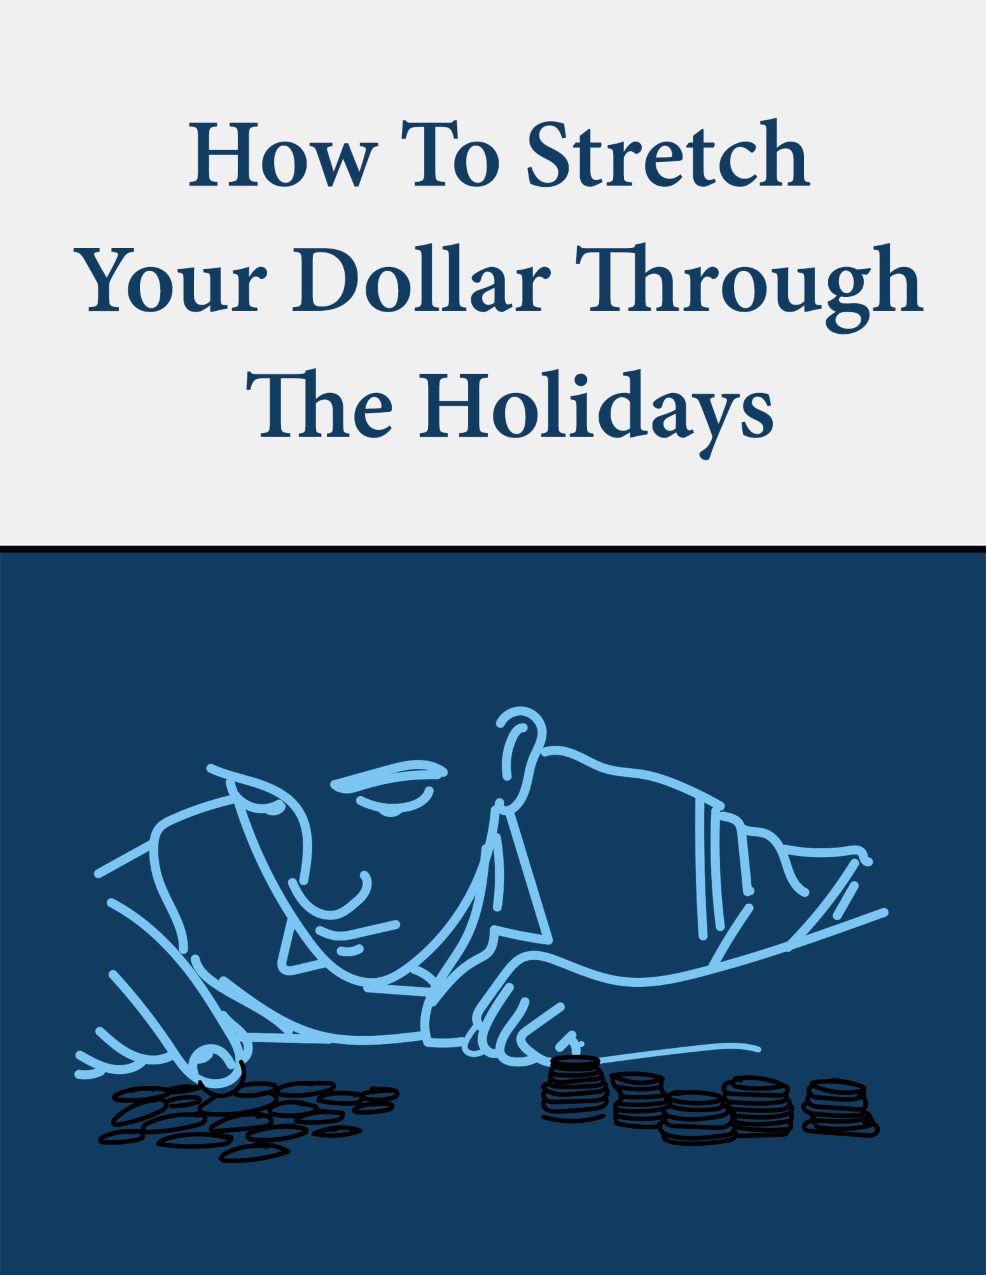 How To Stretch Your Dollar Through The Holidays